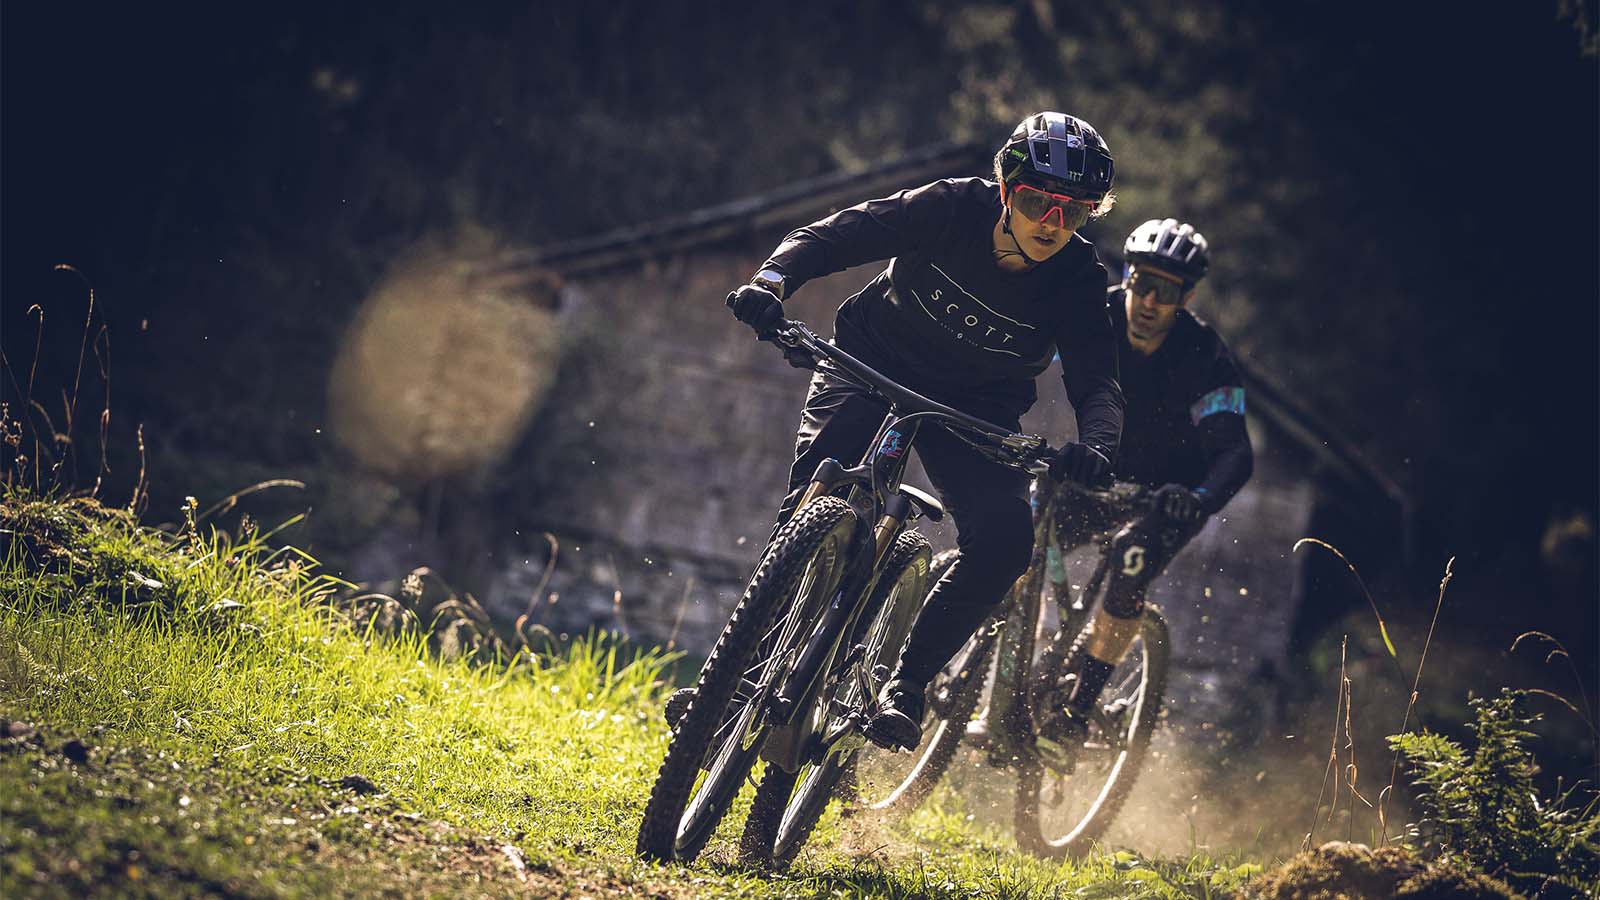 Aosta, Italy - See the Light – Experience the all-new SCOTT Voltage eRIDE